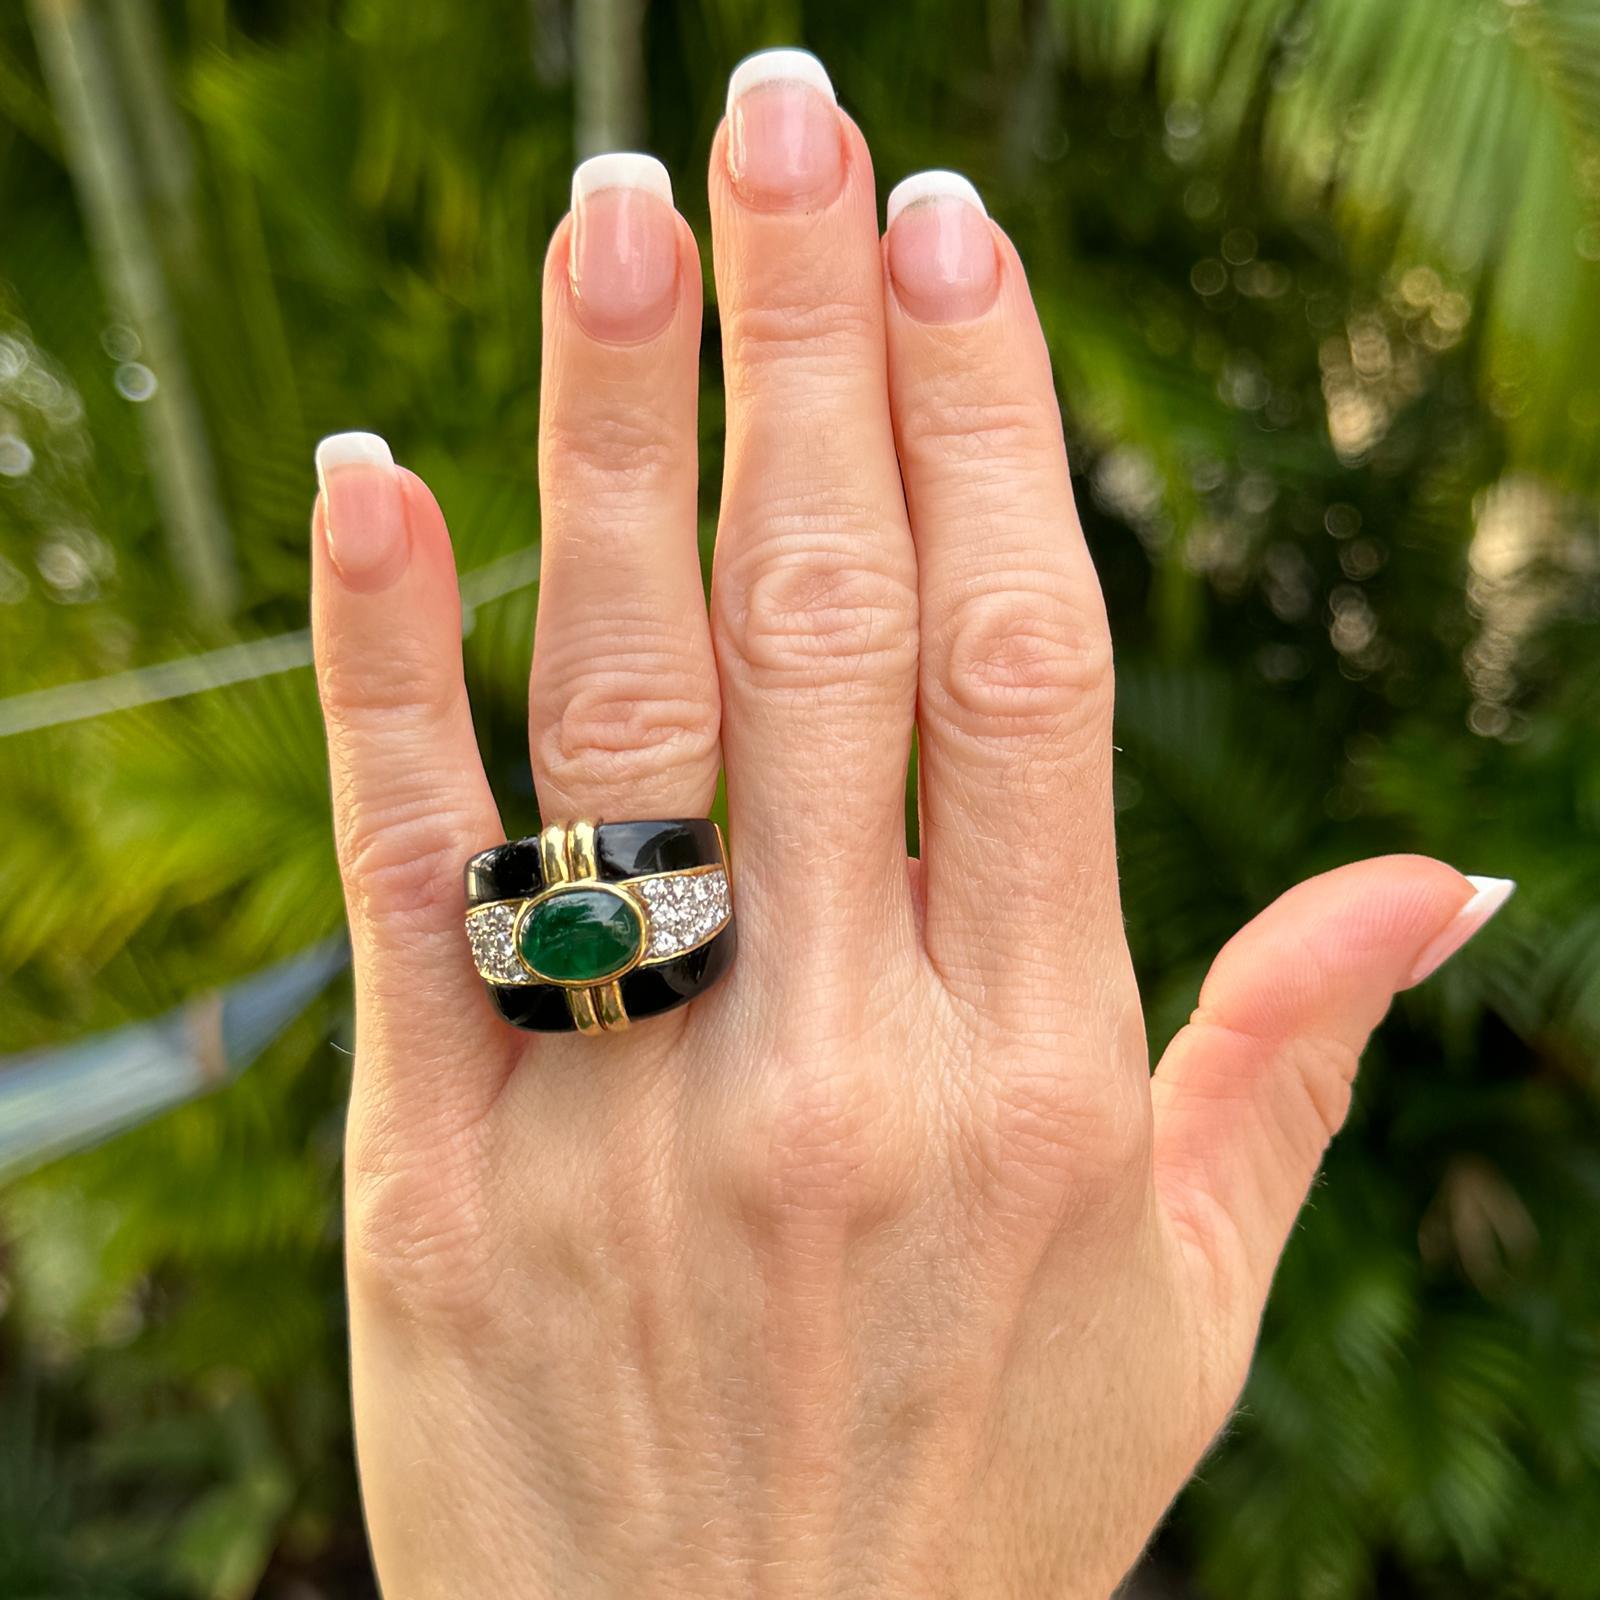 Fabulous emerald, diamond, and onyx cocktail ring handcrafted in 18 karat yellow gold. The band features a bezel set oval cabochon green emerald weighing approximately 4.00 carats, 24 round briliant cut diamonds weighing approximately 2.50 carat